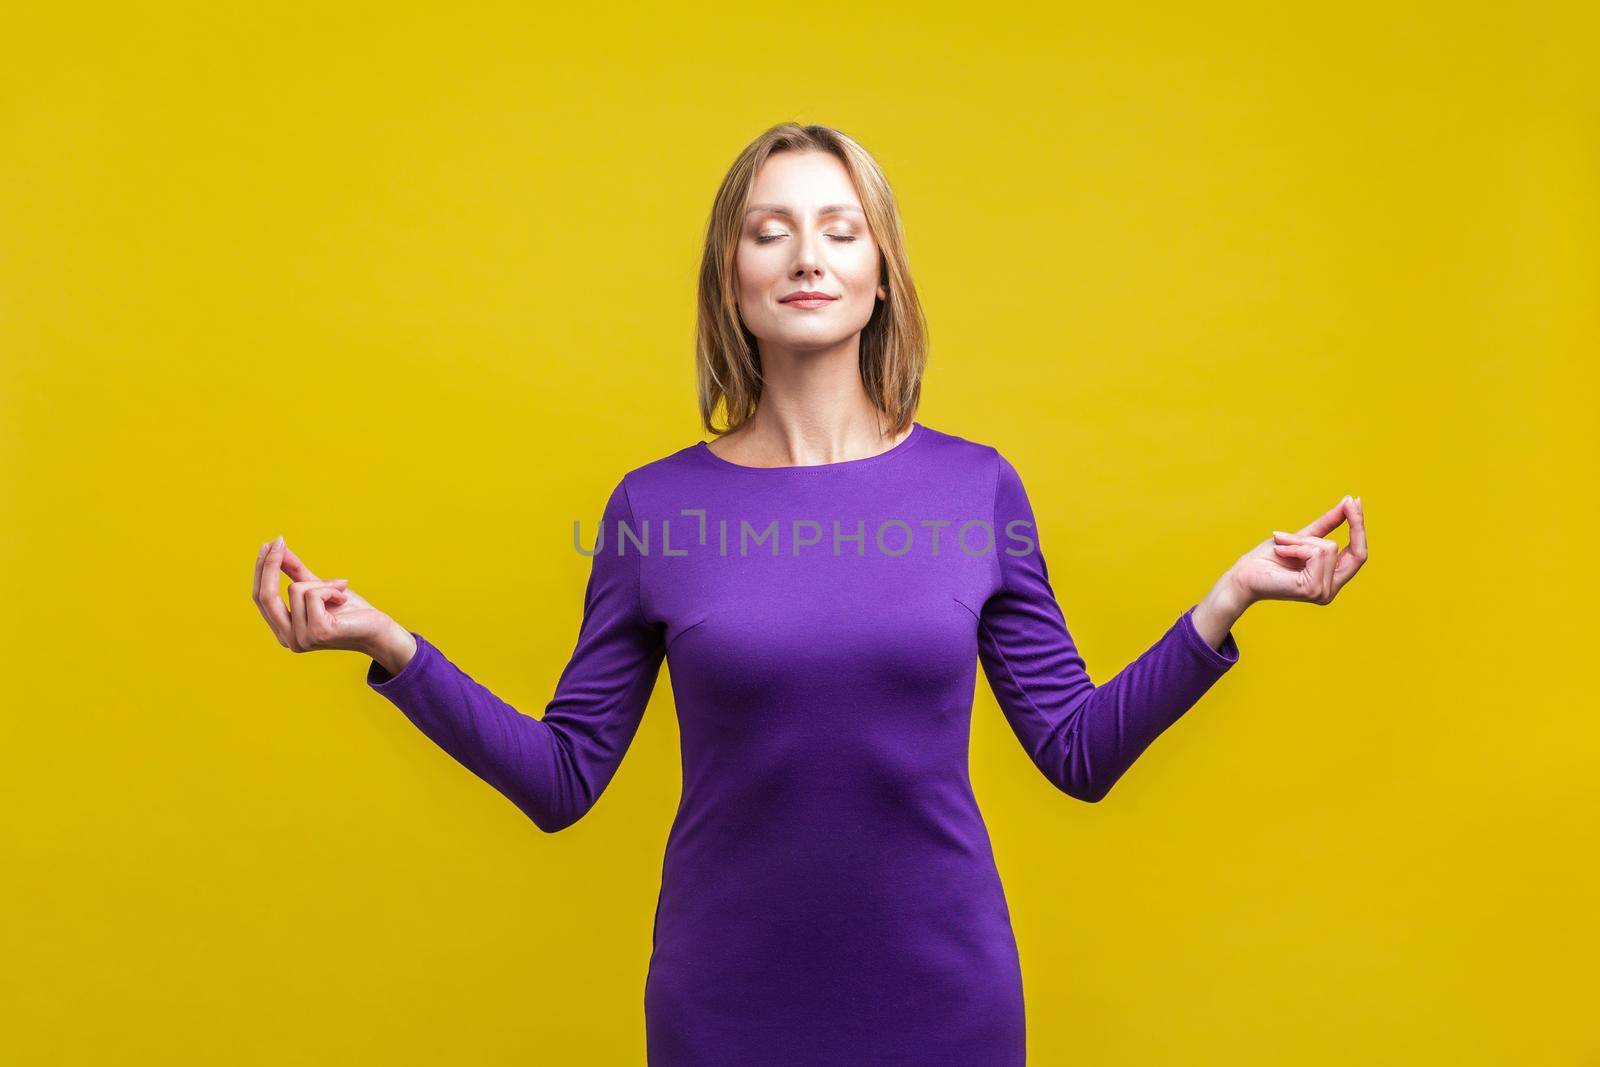 Yoga practice, harmony. Portrait of peaceful woman in purple dress standing with closed eyes and calm face meditating, holding fingers in mudra gesture. studio shot isolated on yellow background